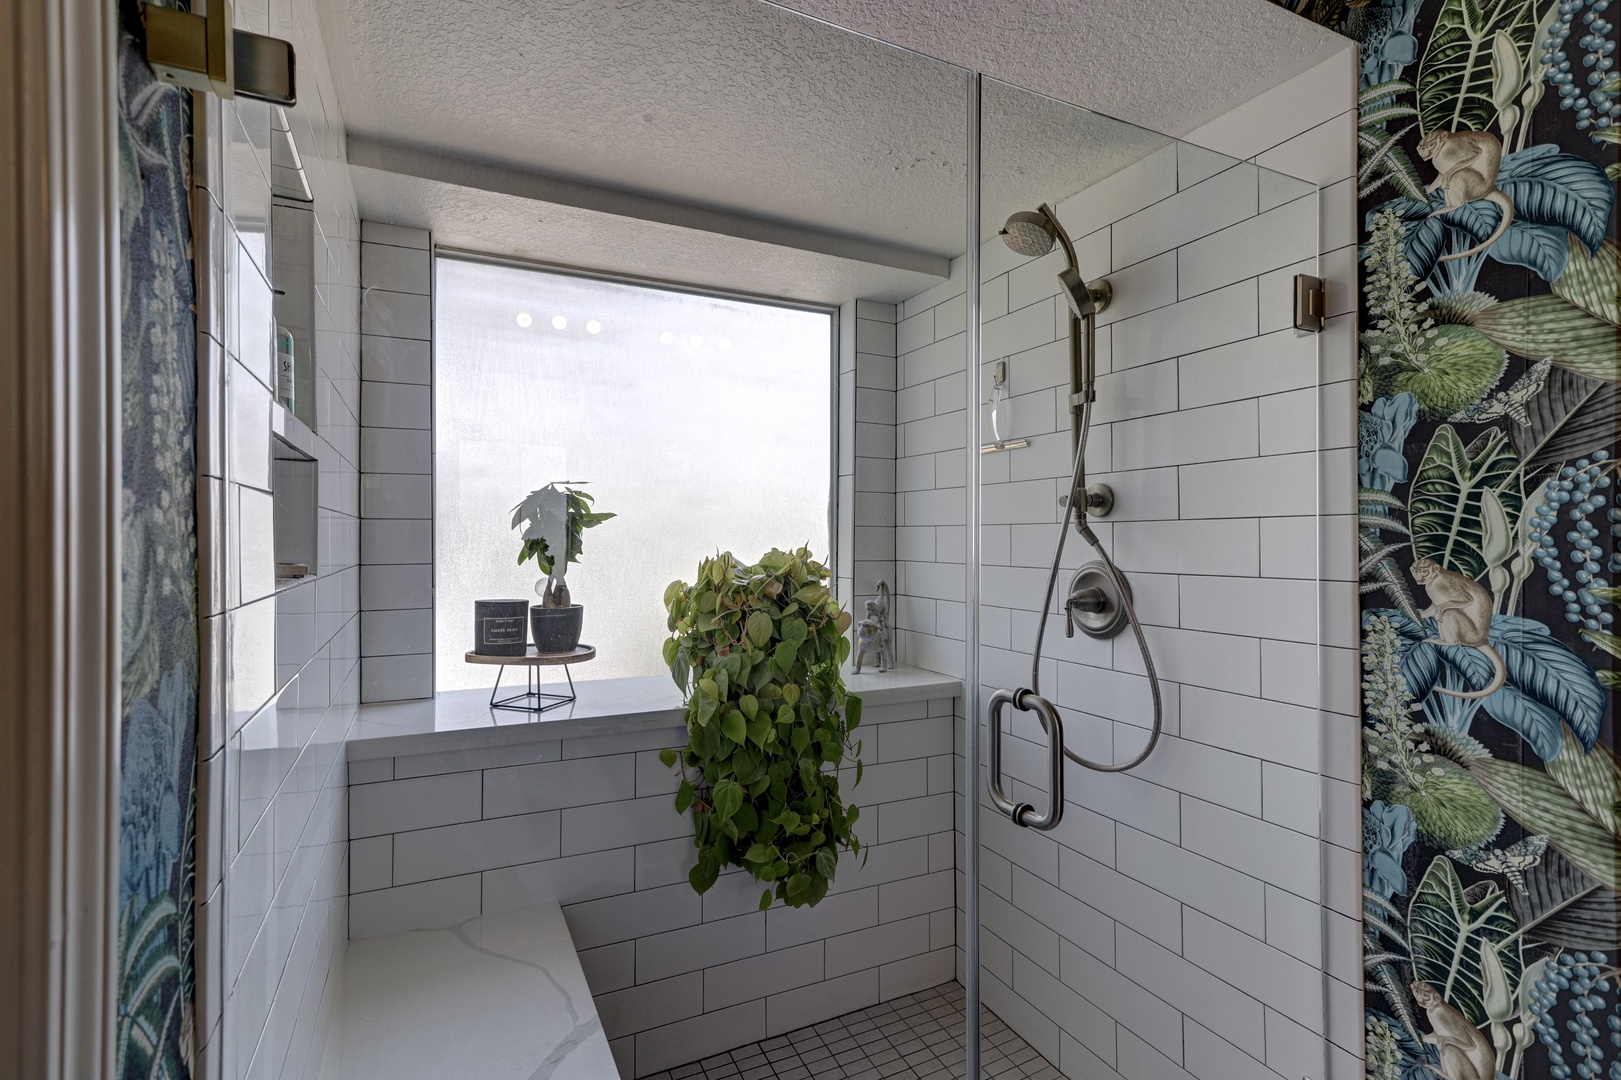 This ensuite features a double vanity, walk-in closet, & luxurious glass shower